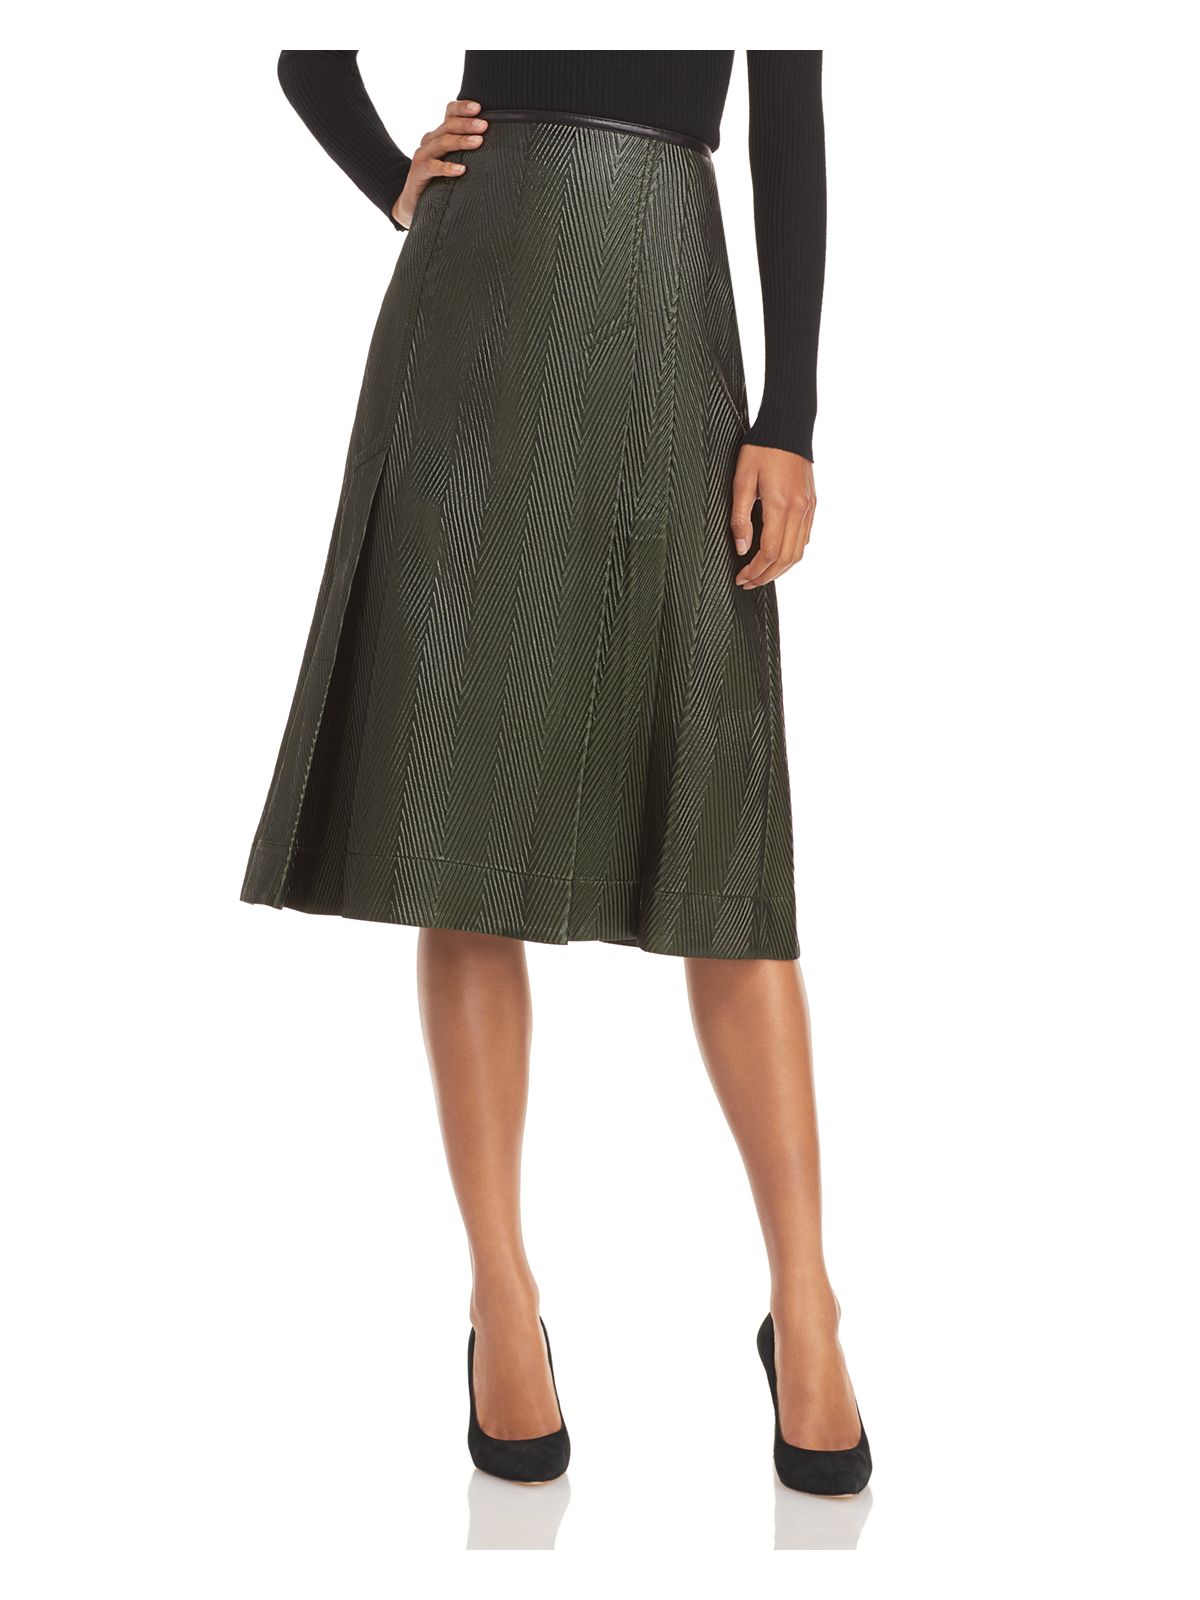 PHILLIP LIN Womens Green Pleated Below The Knee Wear To Work A-Line Skirt 4